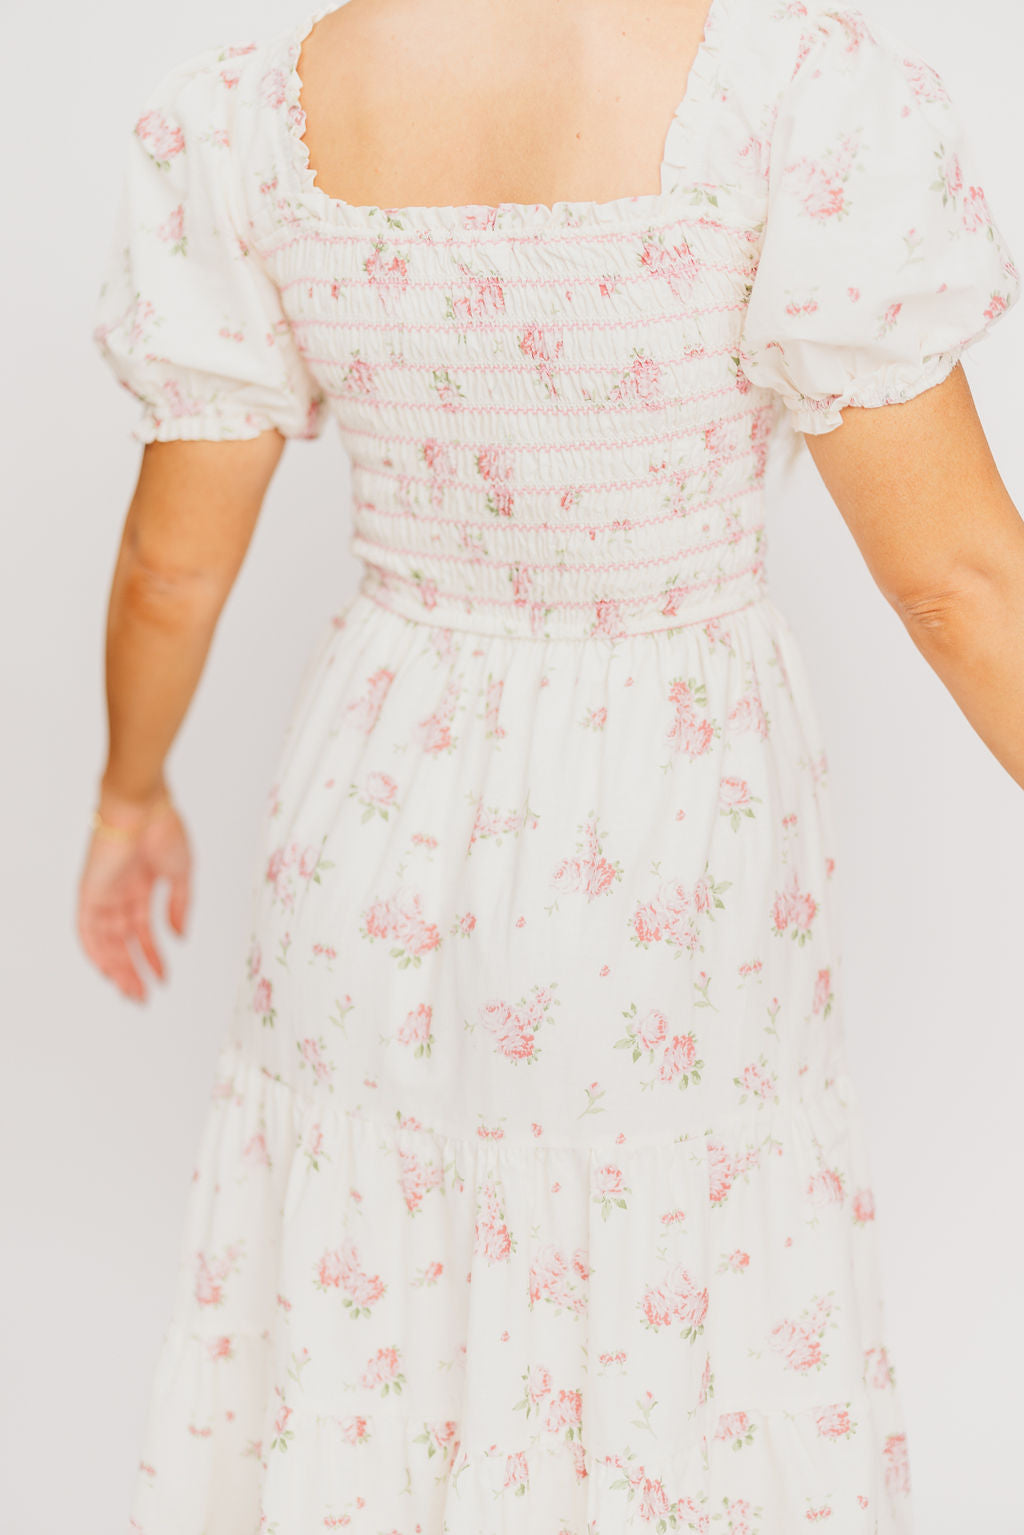 Harper Worth Maxi Dress in Ivory/Pink Floral - Inclusive Sizing (S-3XL) - Bump Friendly ($30 OFF PRE-ORDER ONLY) Arrives 4/30